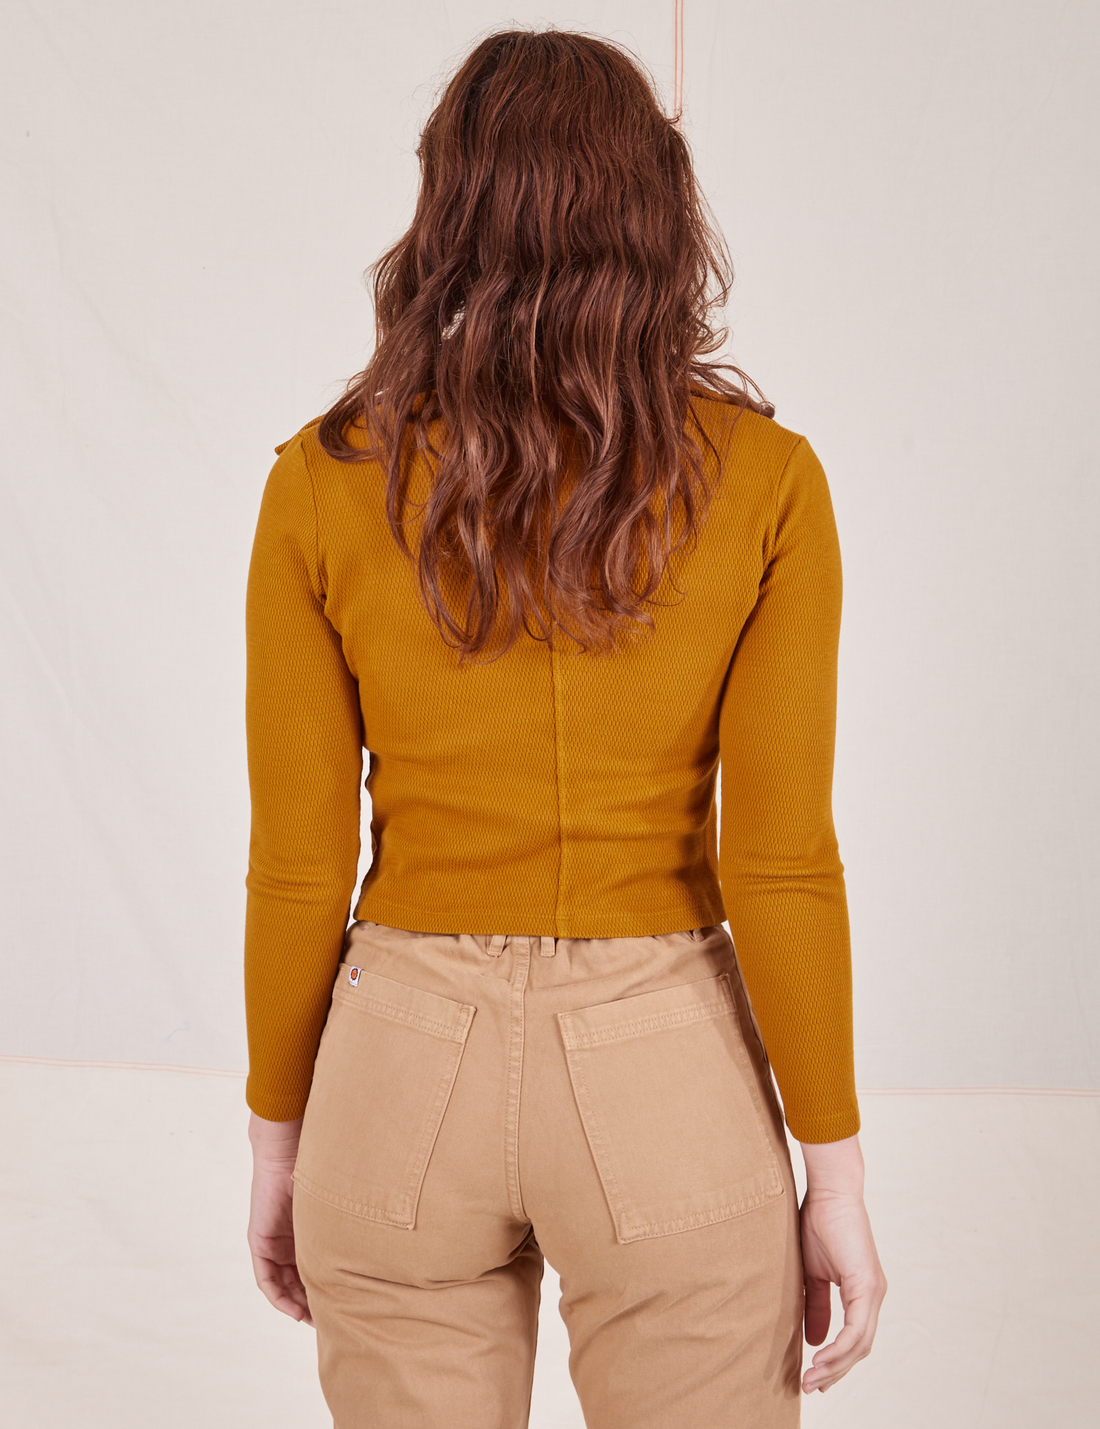 Long Sleeve Fisherman Polo in Spicy Mustard back view on Alex wearing tan Work Pants